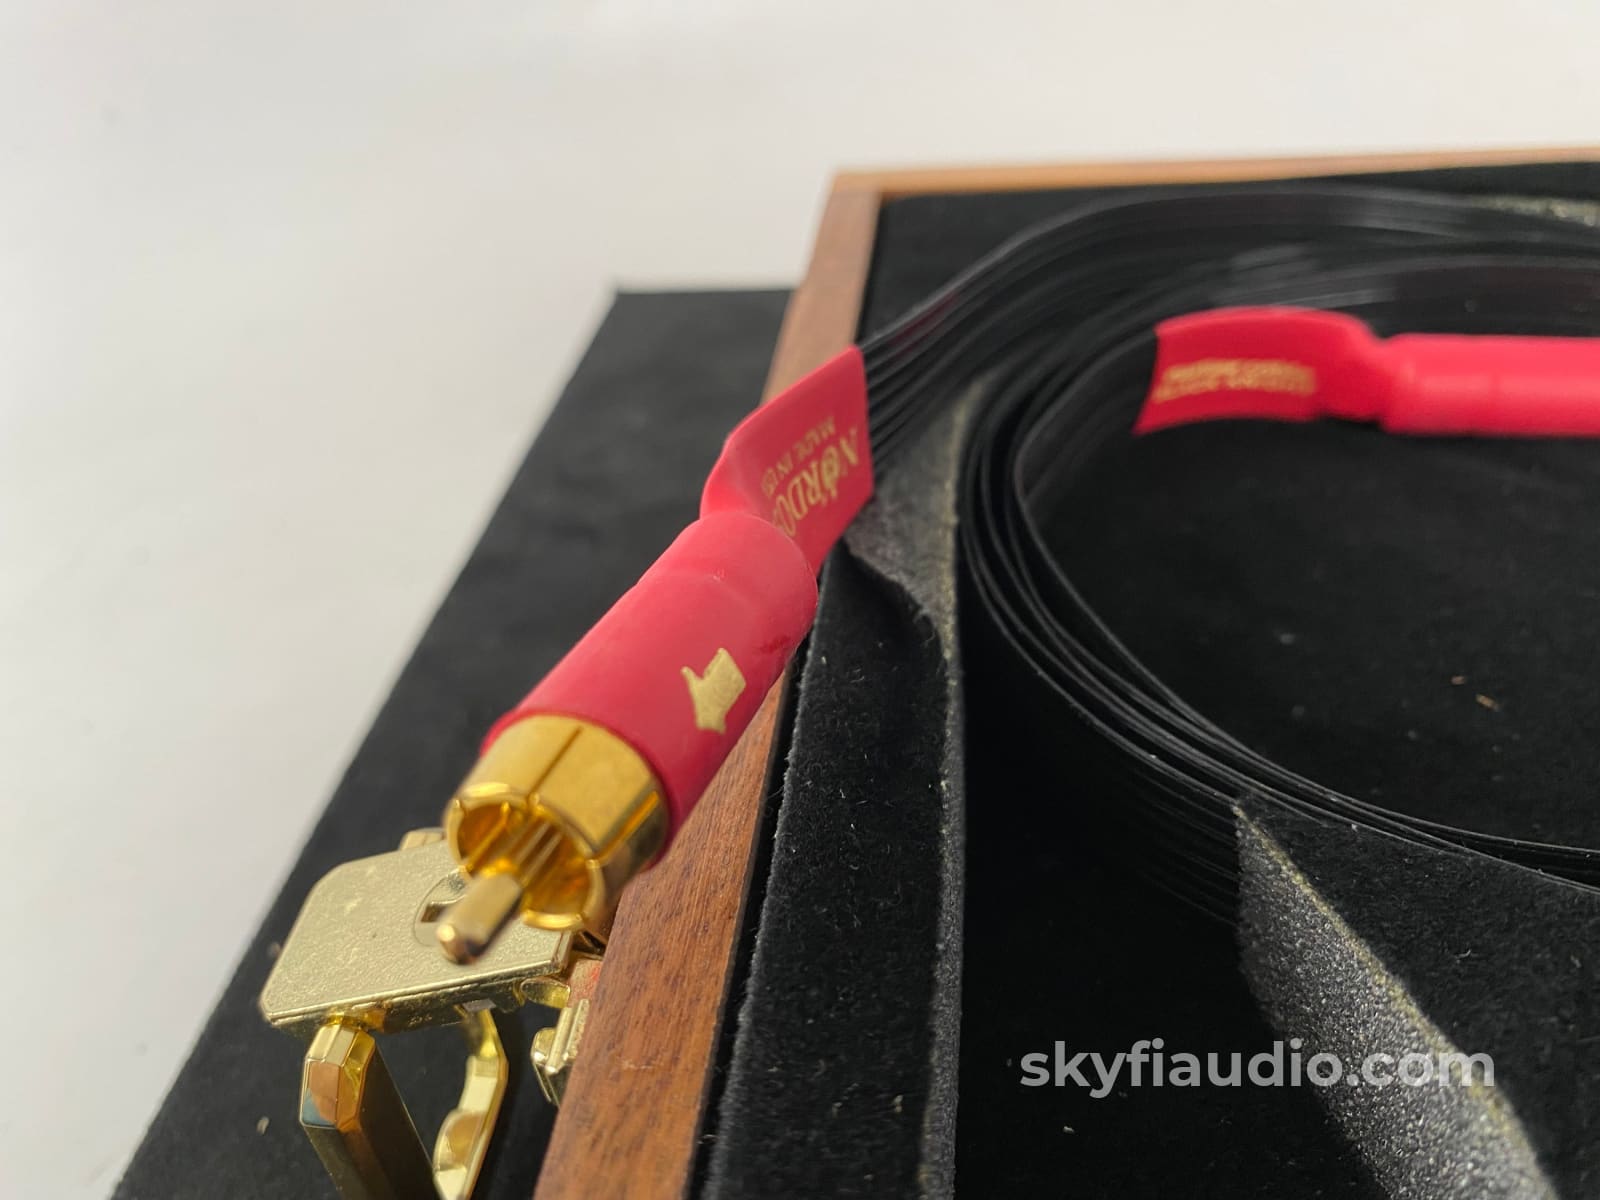 Nordost Black Knight Rca Interconnects With Wood Case - 2M Cables